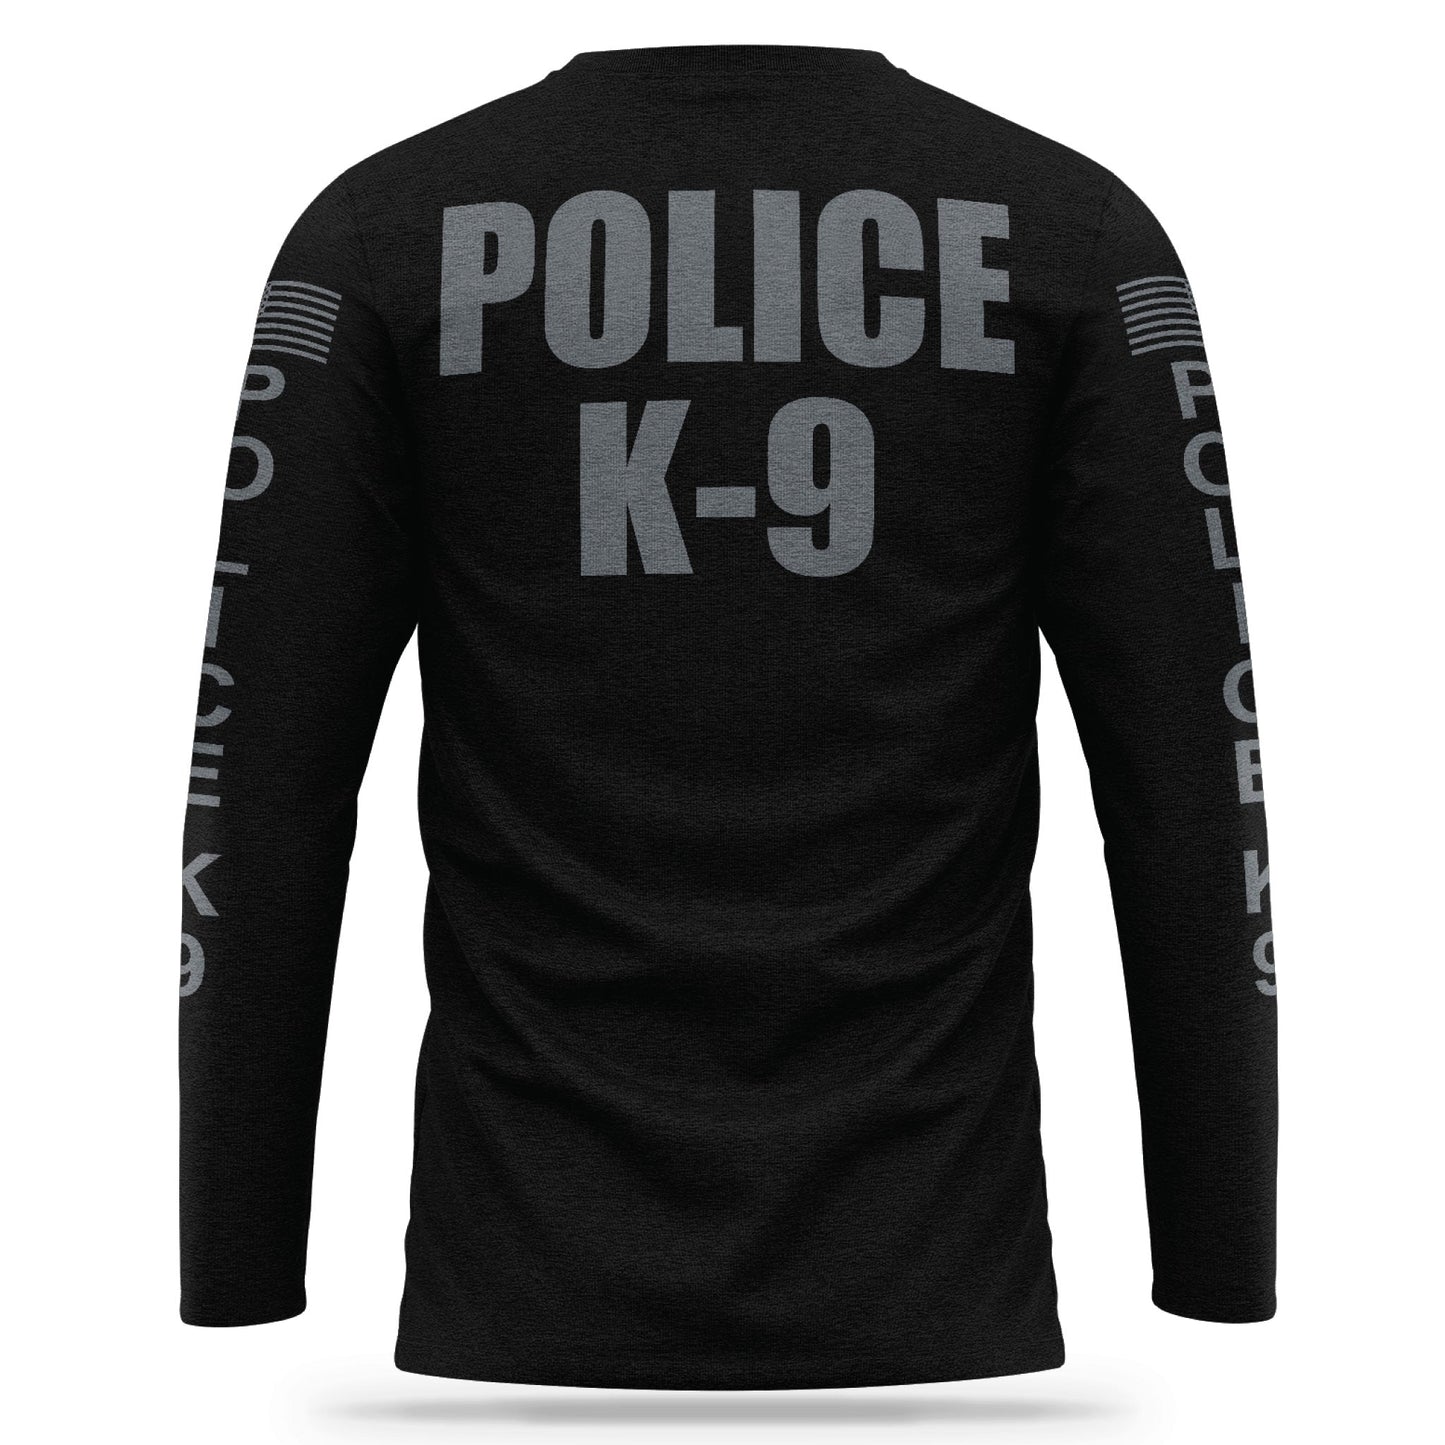 [POLICE K9] Cotton Blend Long Sleeve [BLK/GRY]-13 Fifty Apparel